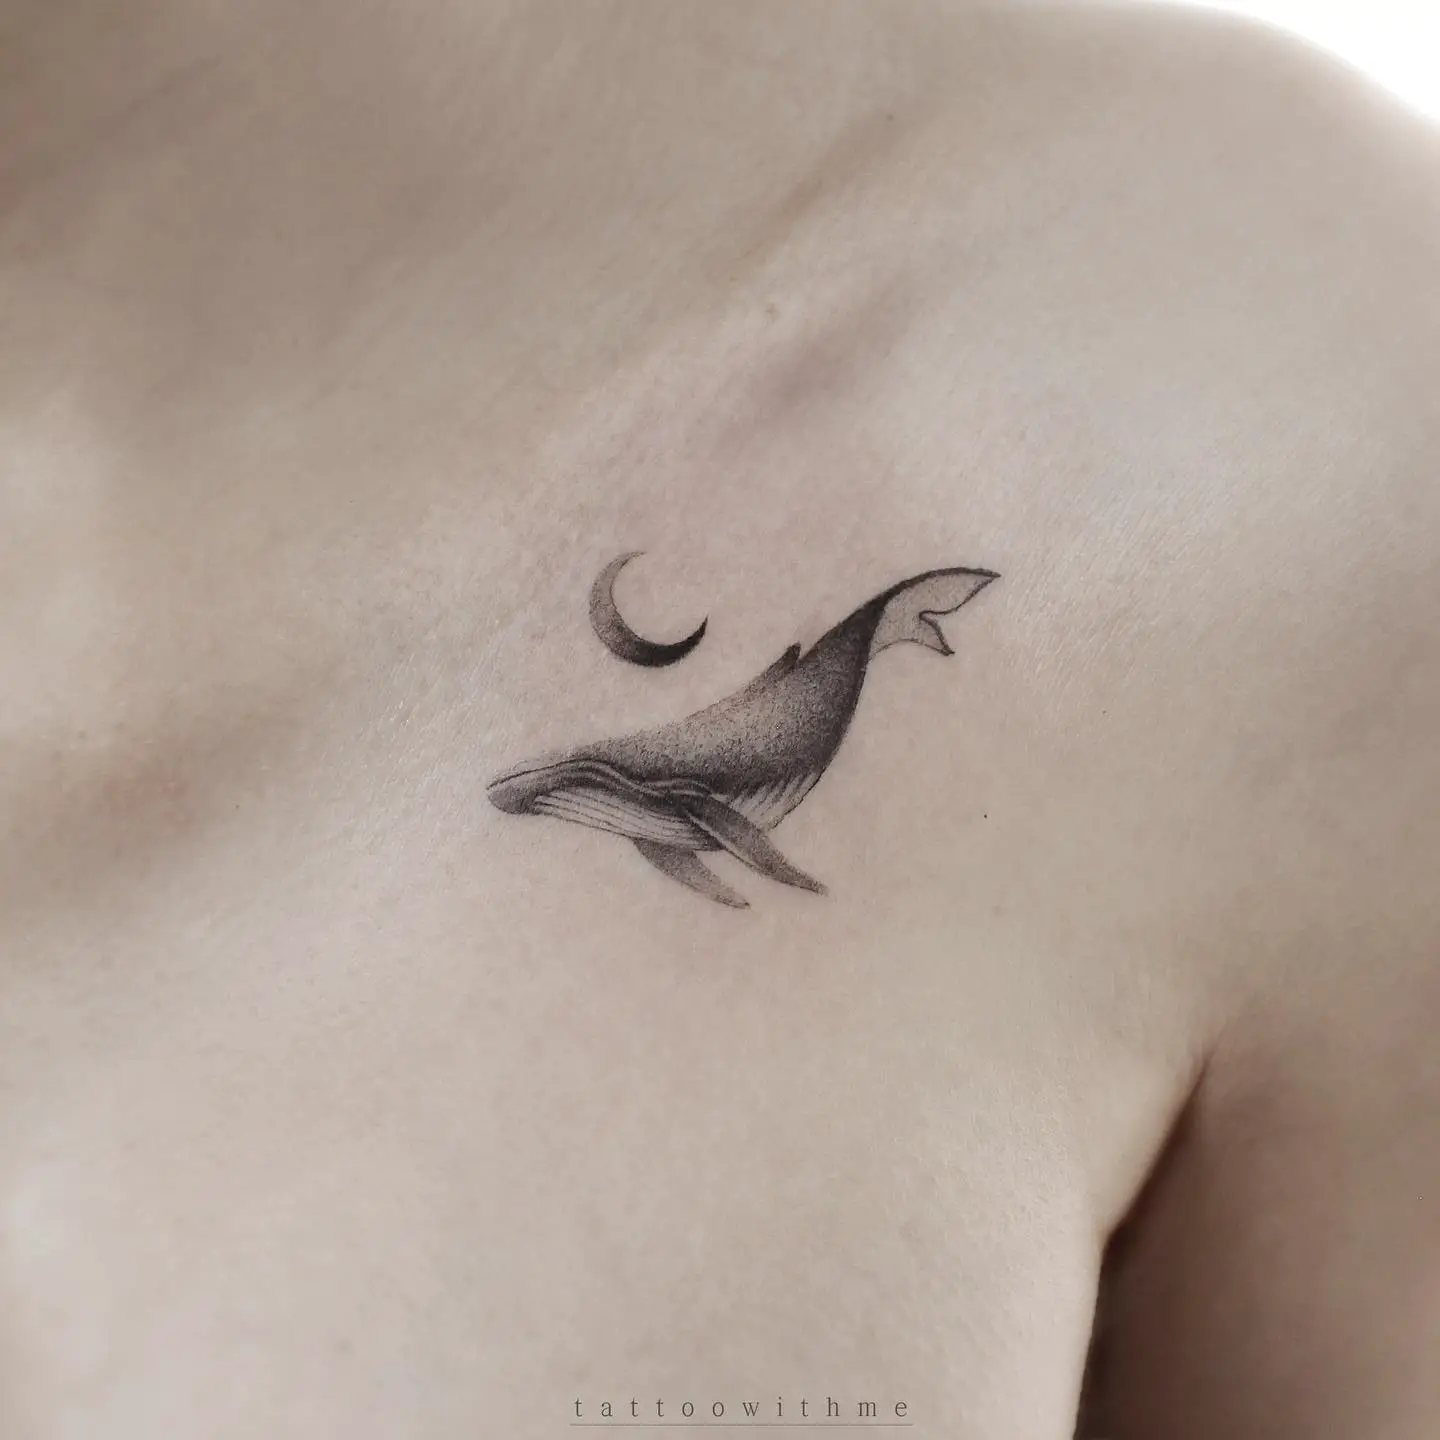 Minialistic whale tattoo by tattoowithme